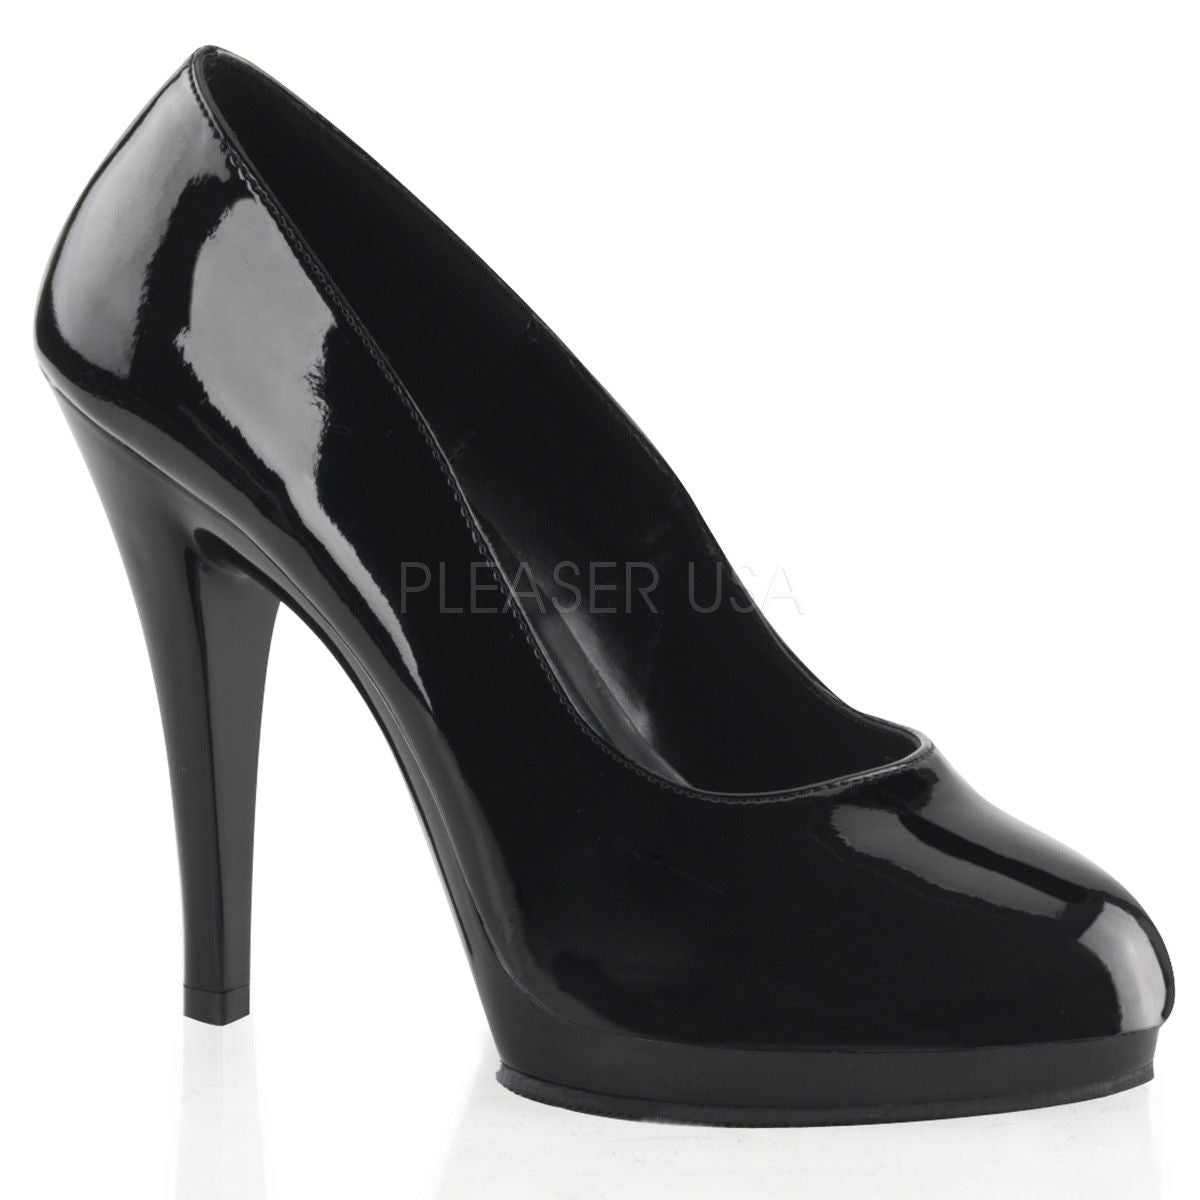 High Heels Online - Williams Shoes